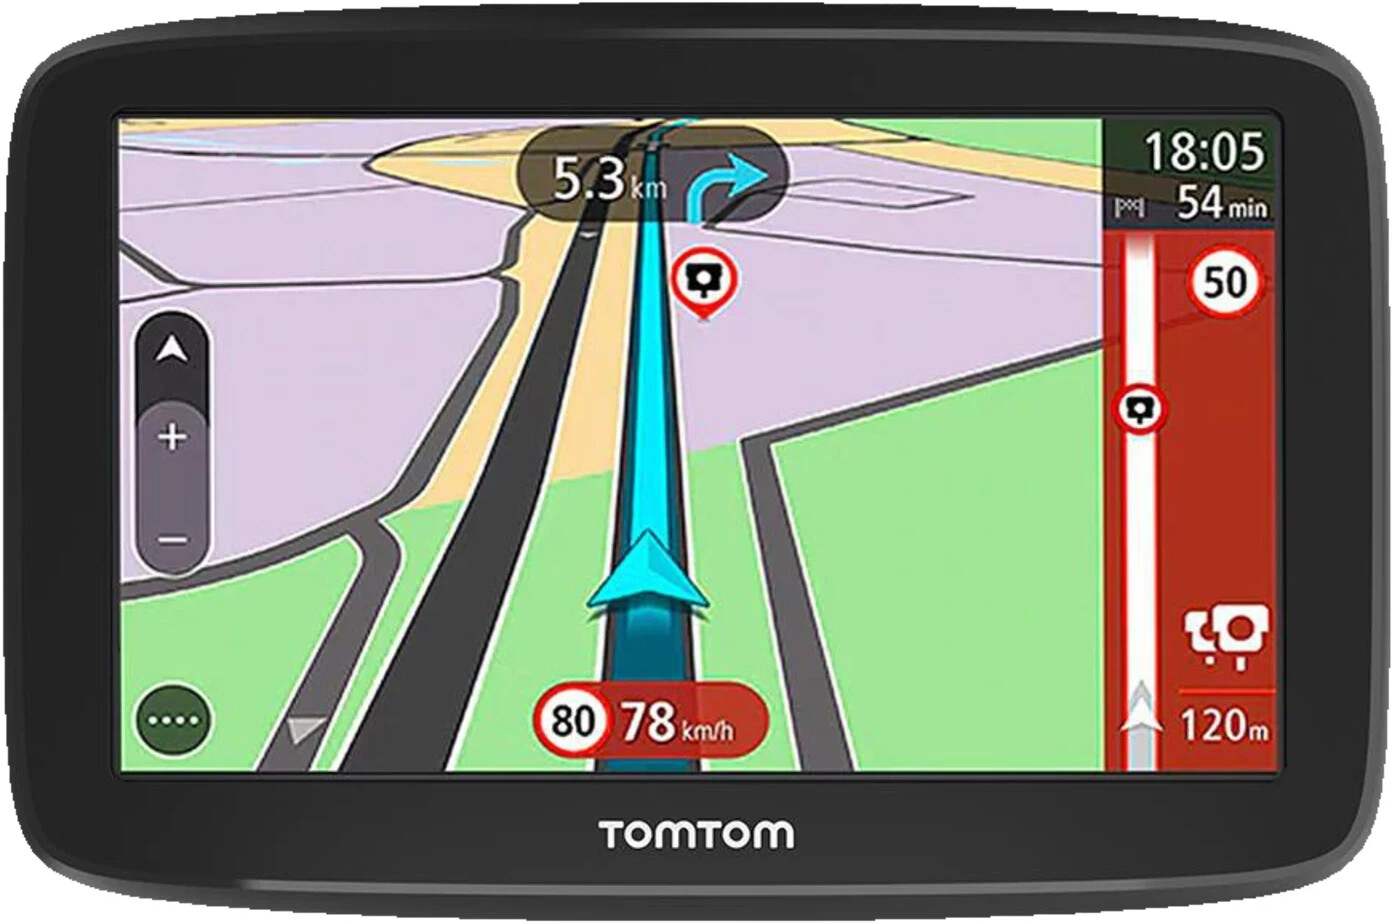 Buy TomTom Go Classic EU 6 from £125.49 (Today) – Best Deals on